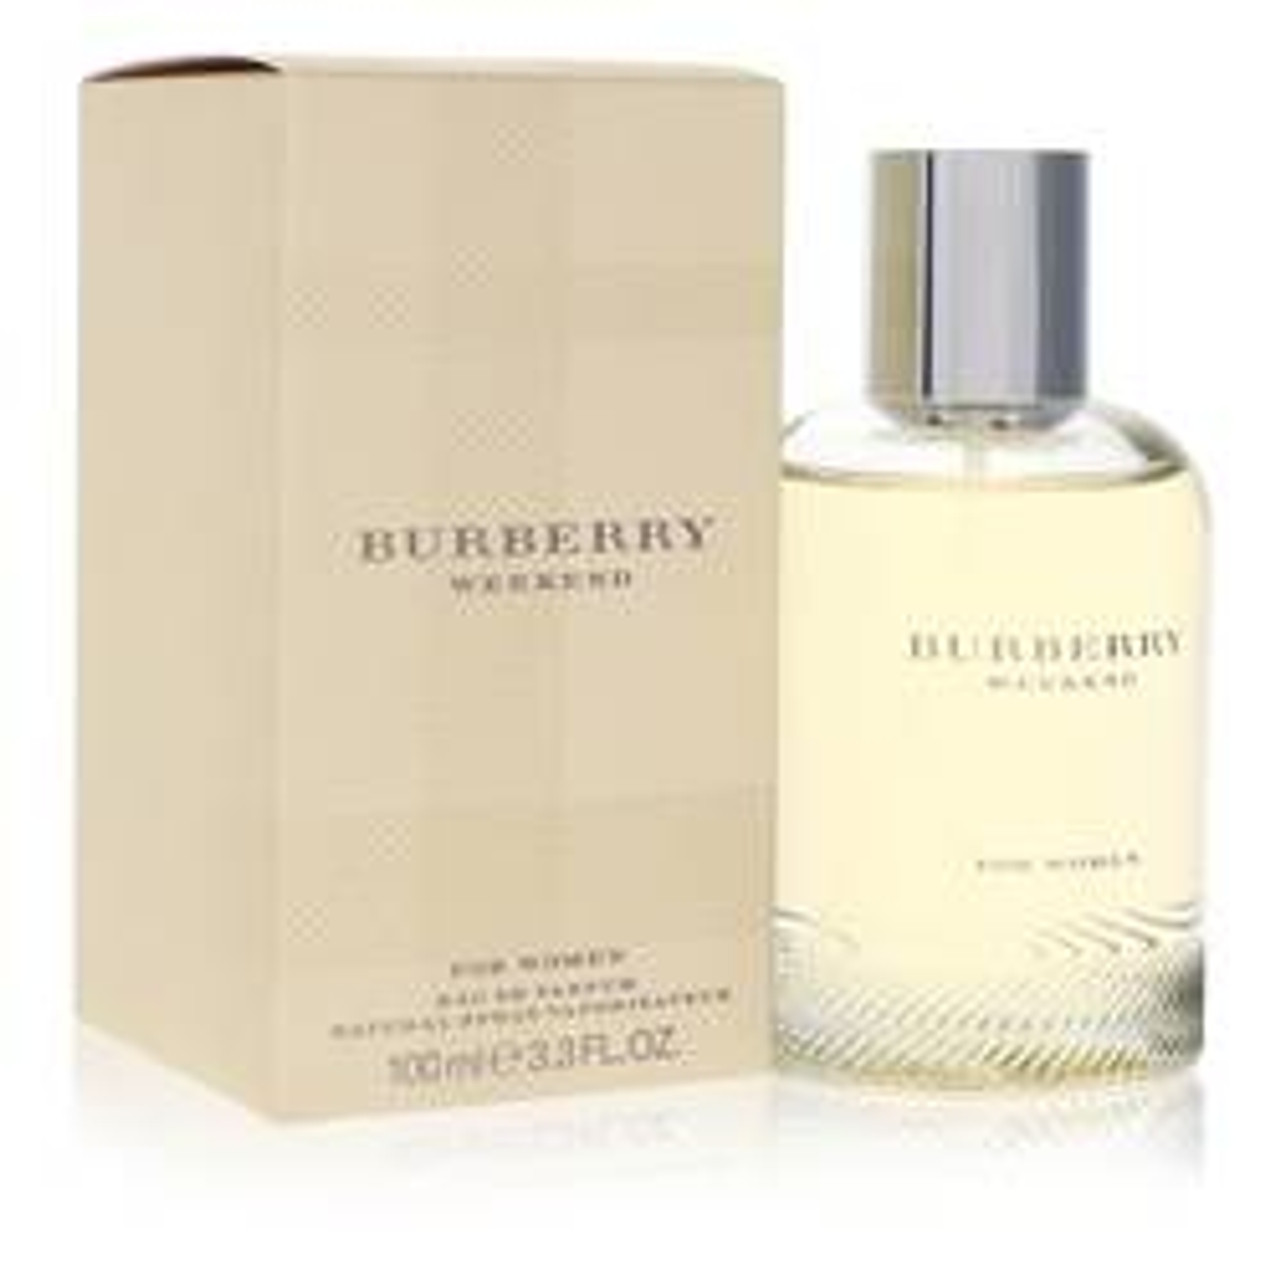 Weekend Perfume By Burberry Eau De Parfum Spray 3.4 oz for Women - [From 124.00 - Choose pk Qty ] - *Ships from Miami